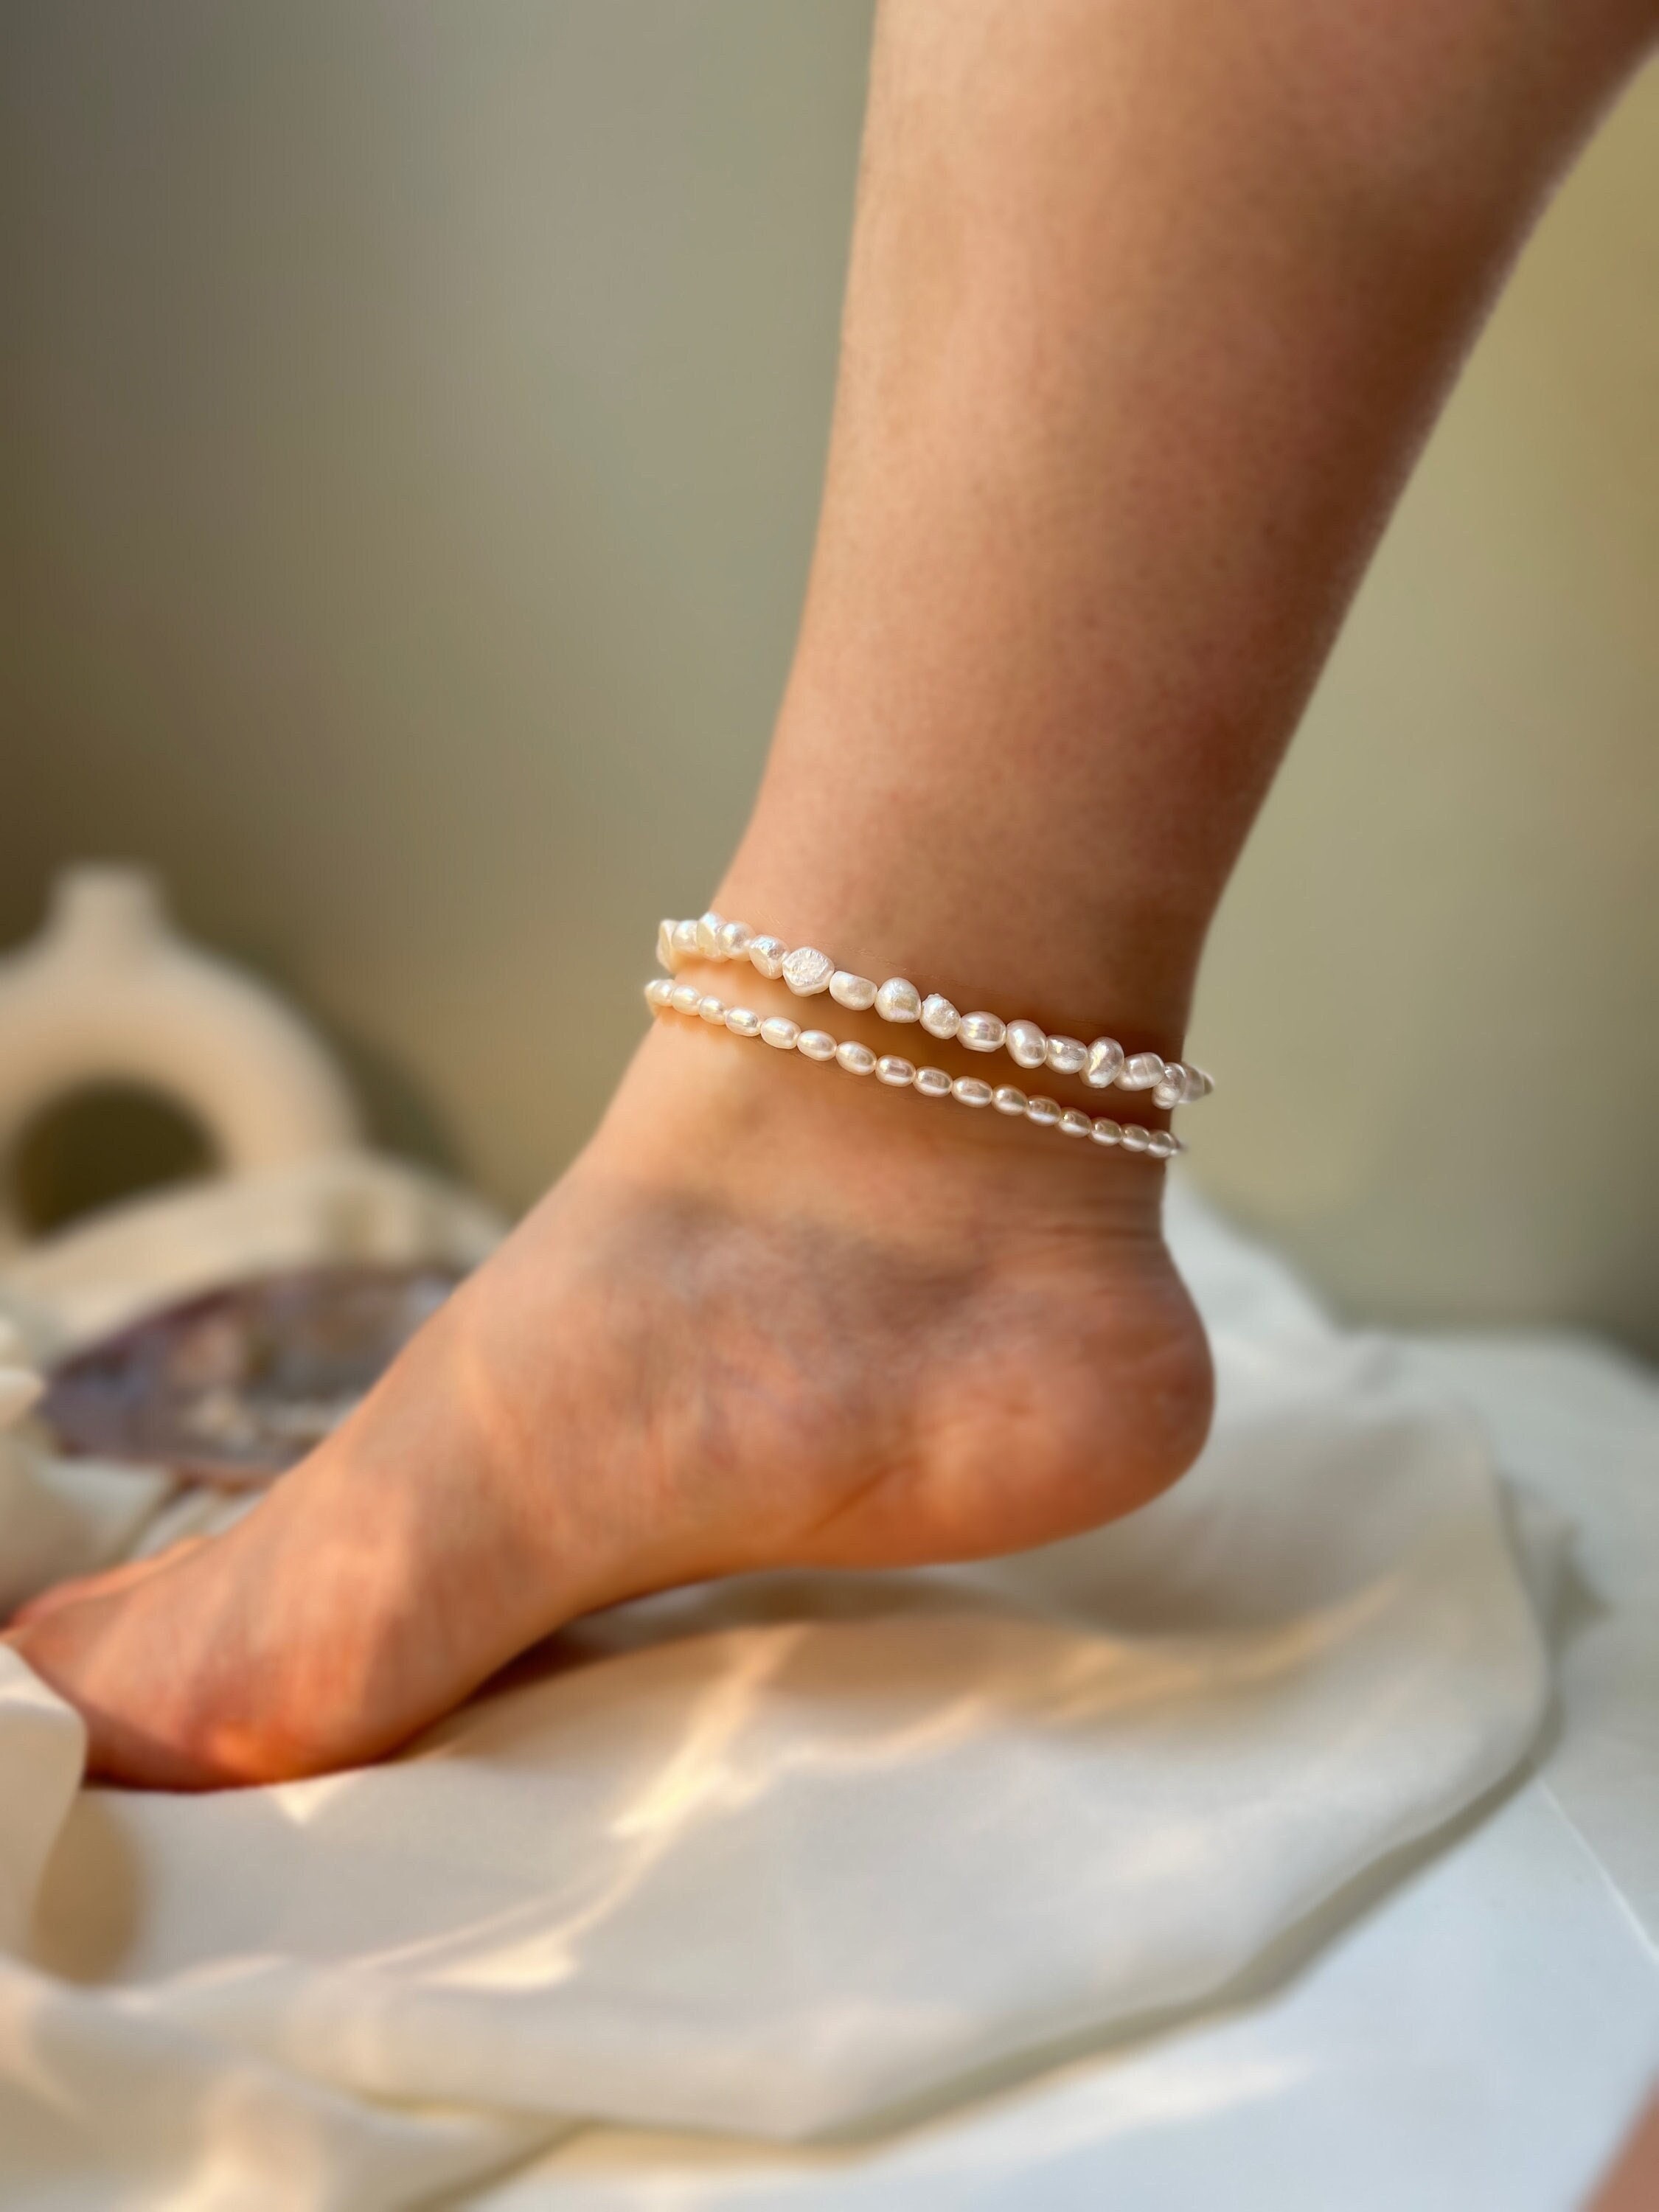 Elegant Bracelet Featuring White SemiRound Pearls  Silver Flat Baroque   Pure Pearls